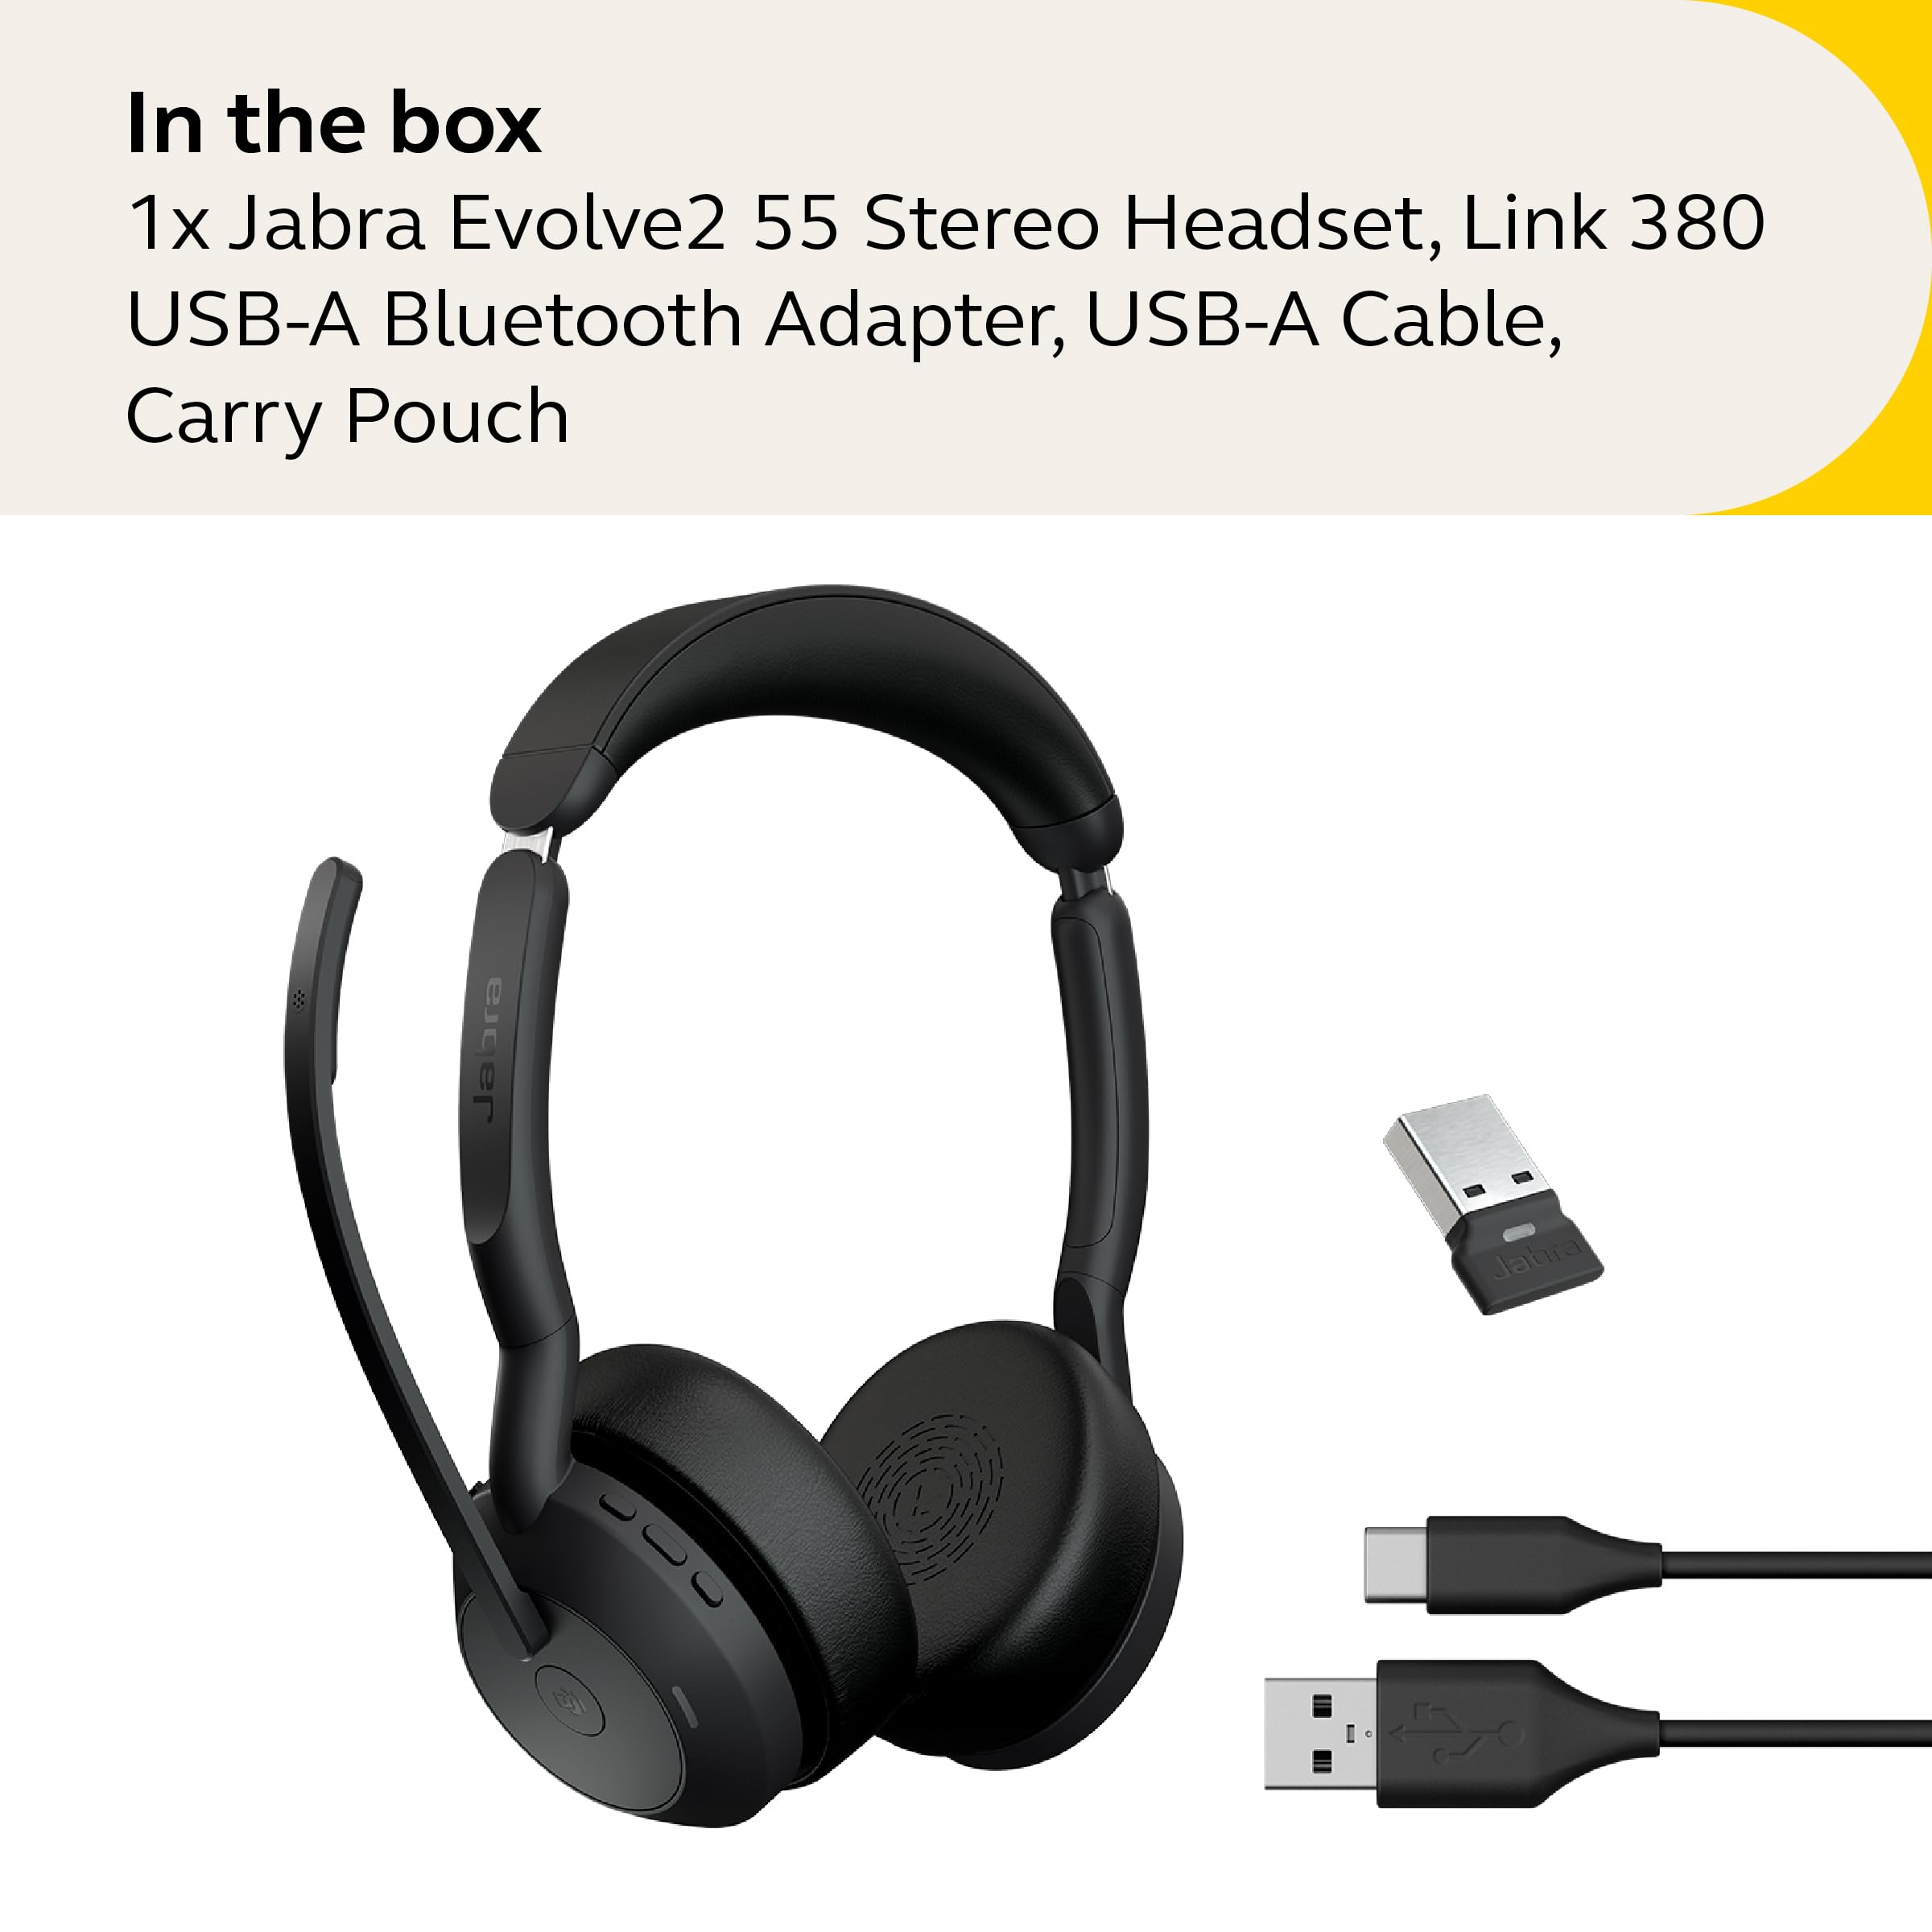 Jabra Evolve2 55 Stereo Wireless Headset - Features AirComfort Technology, Noise-Cancelling Mics & Active Noise Cancellation - MS Teams Certified, Works with Other Platforms - Black